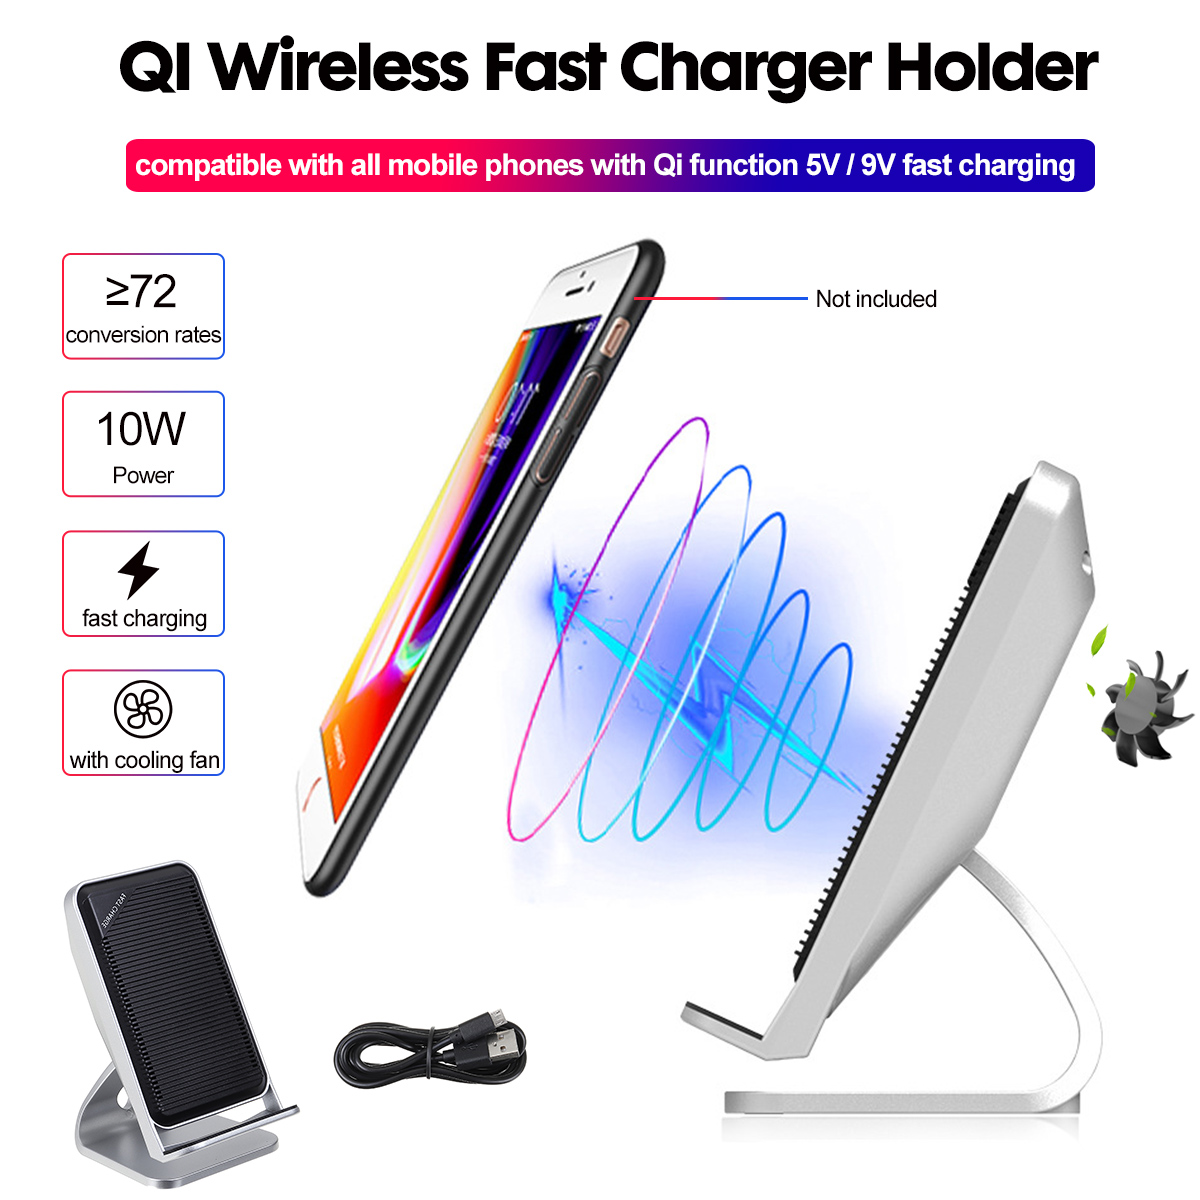 Bakeey-10W-QI-Wireless-Fast-Charger-Holder-Double-Coil-With-Cooling-Fan-Type-C-for-iPhone-11-Pro-for-1600441-1